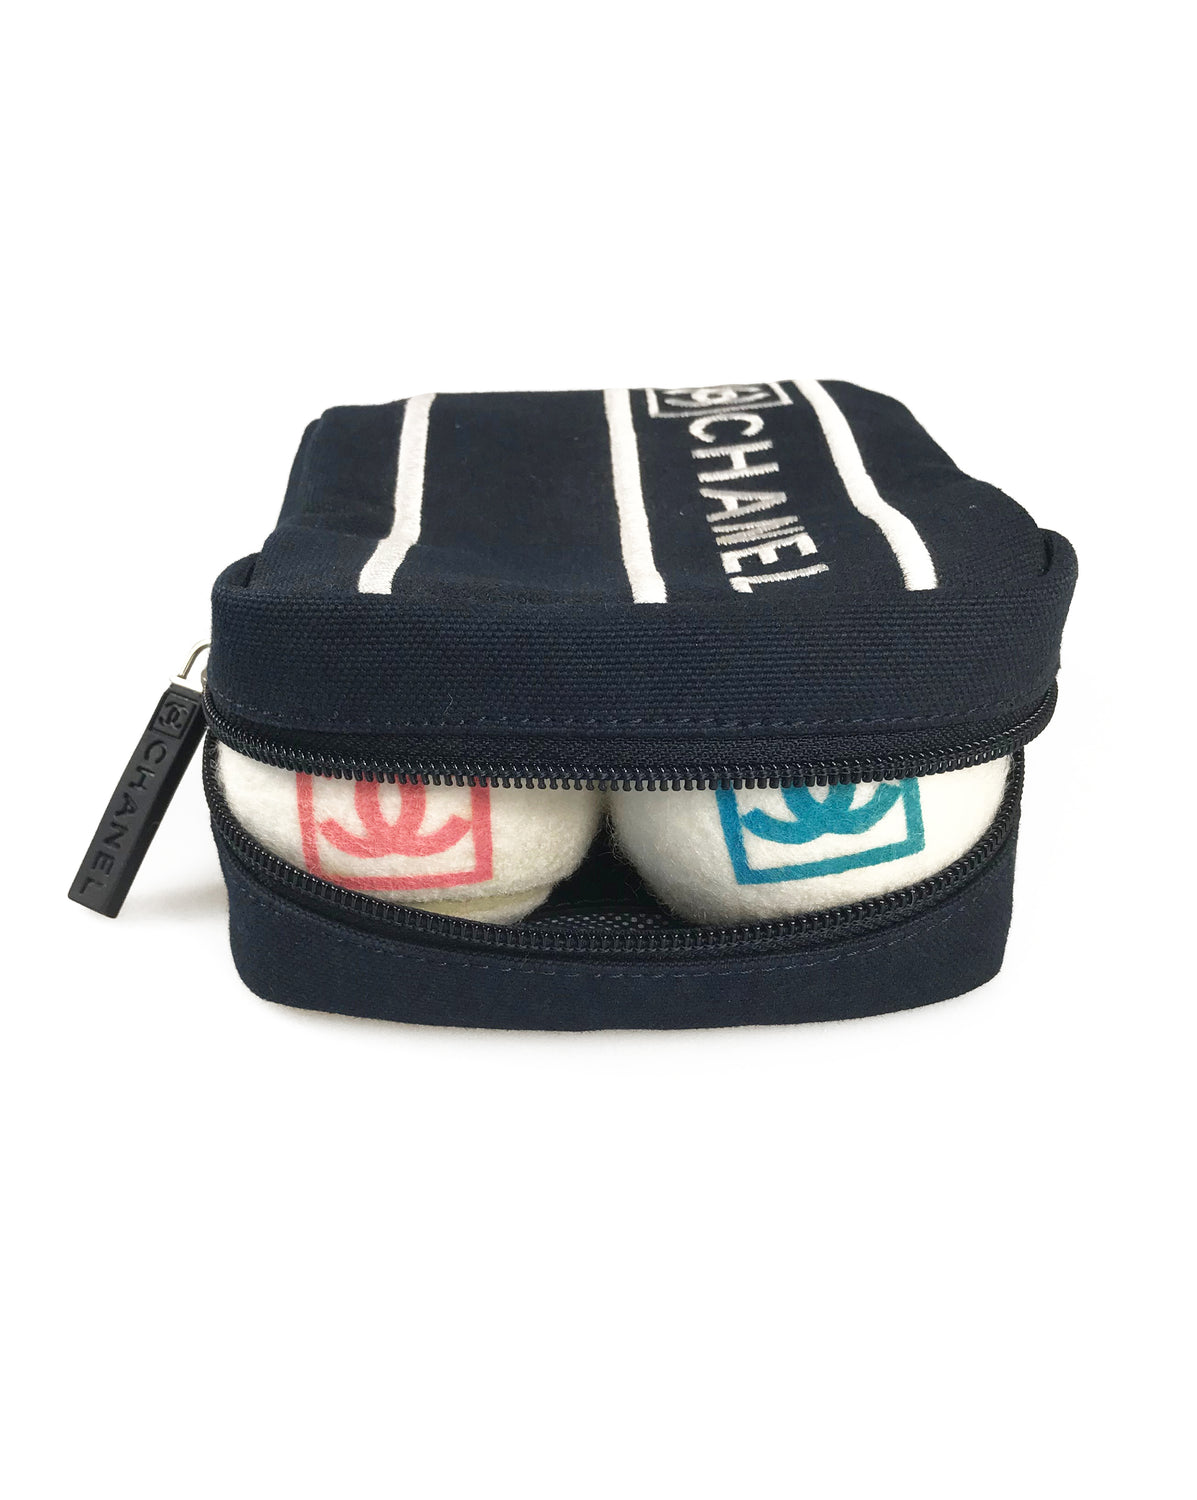 Fruit Vintage Chanel tennis ball set - a rare and important Chanel collectors accessory. It features a 4 Chanel tennis balls (2 pink and 2 blue) in a navy zipper accessory pouch with logo embroidery. 